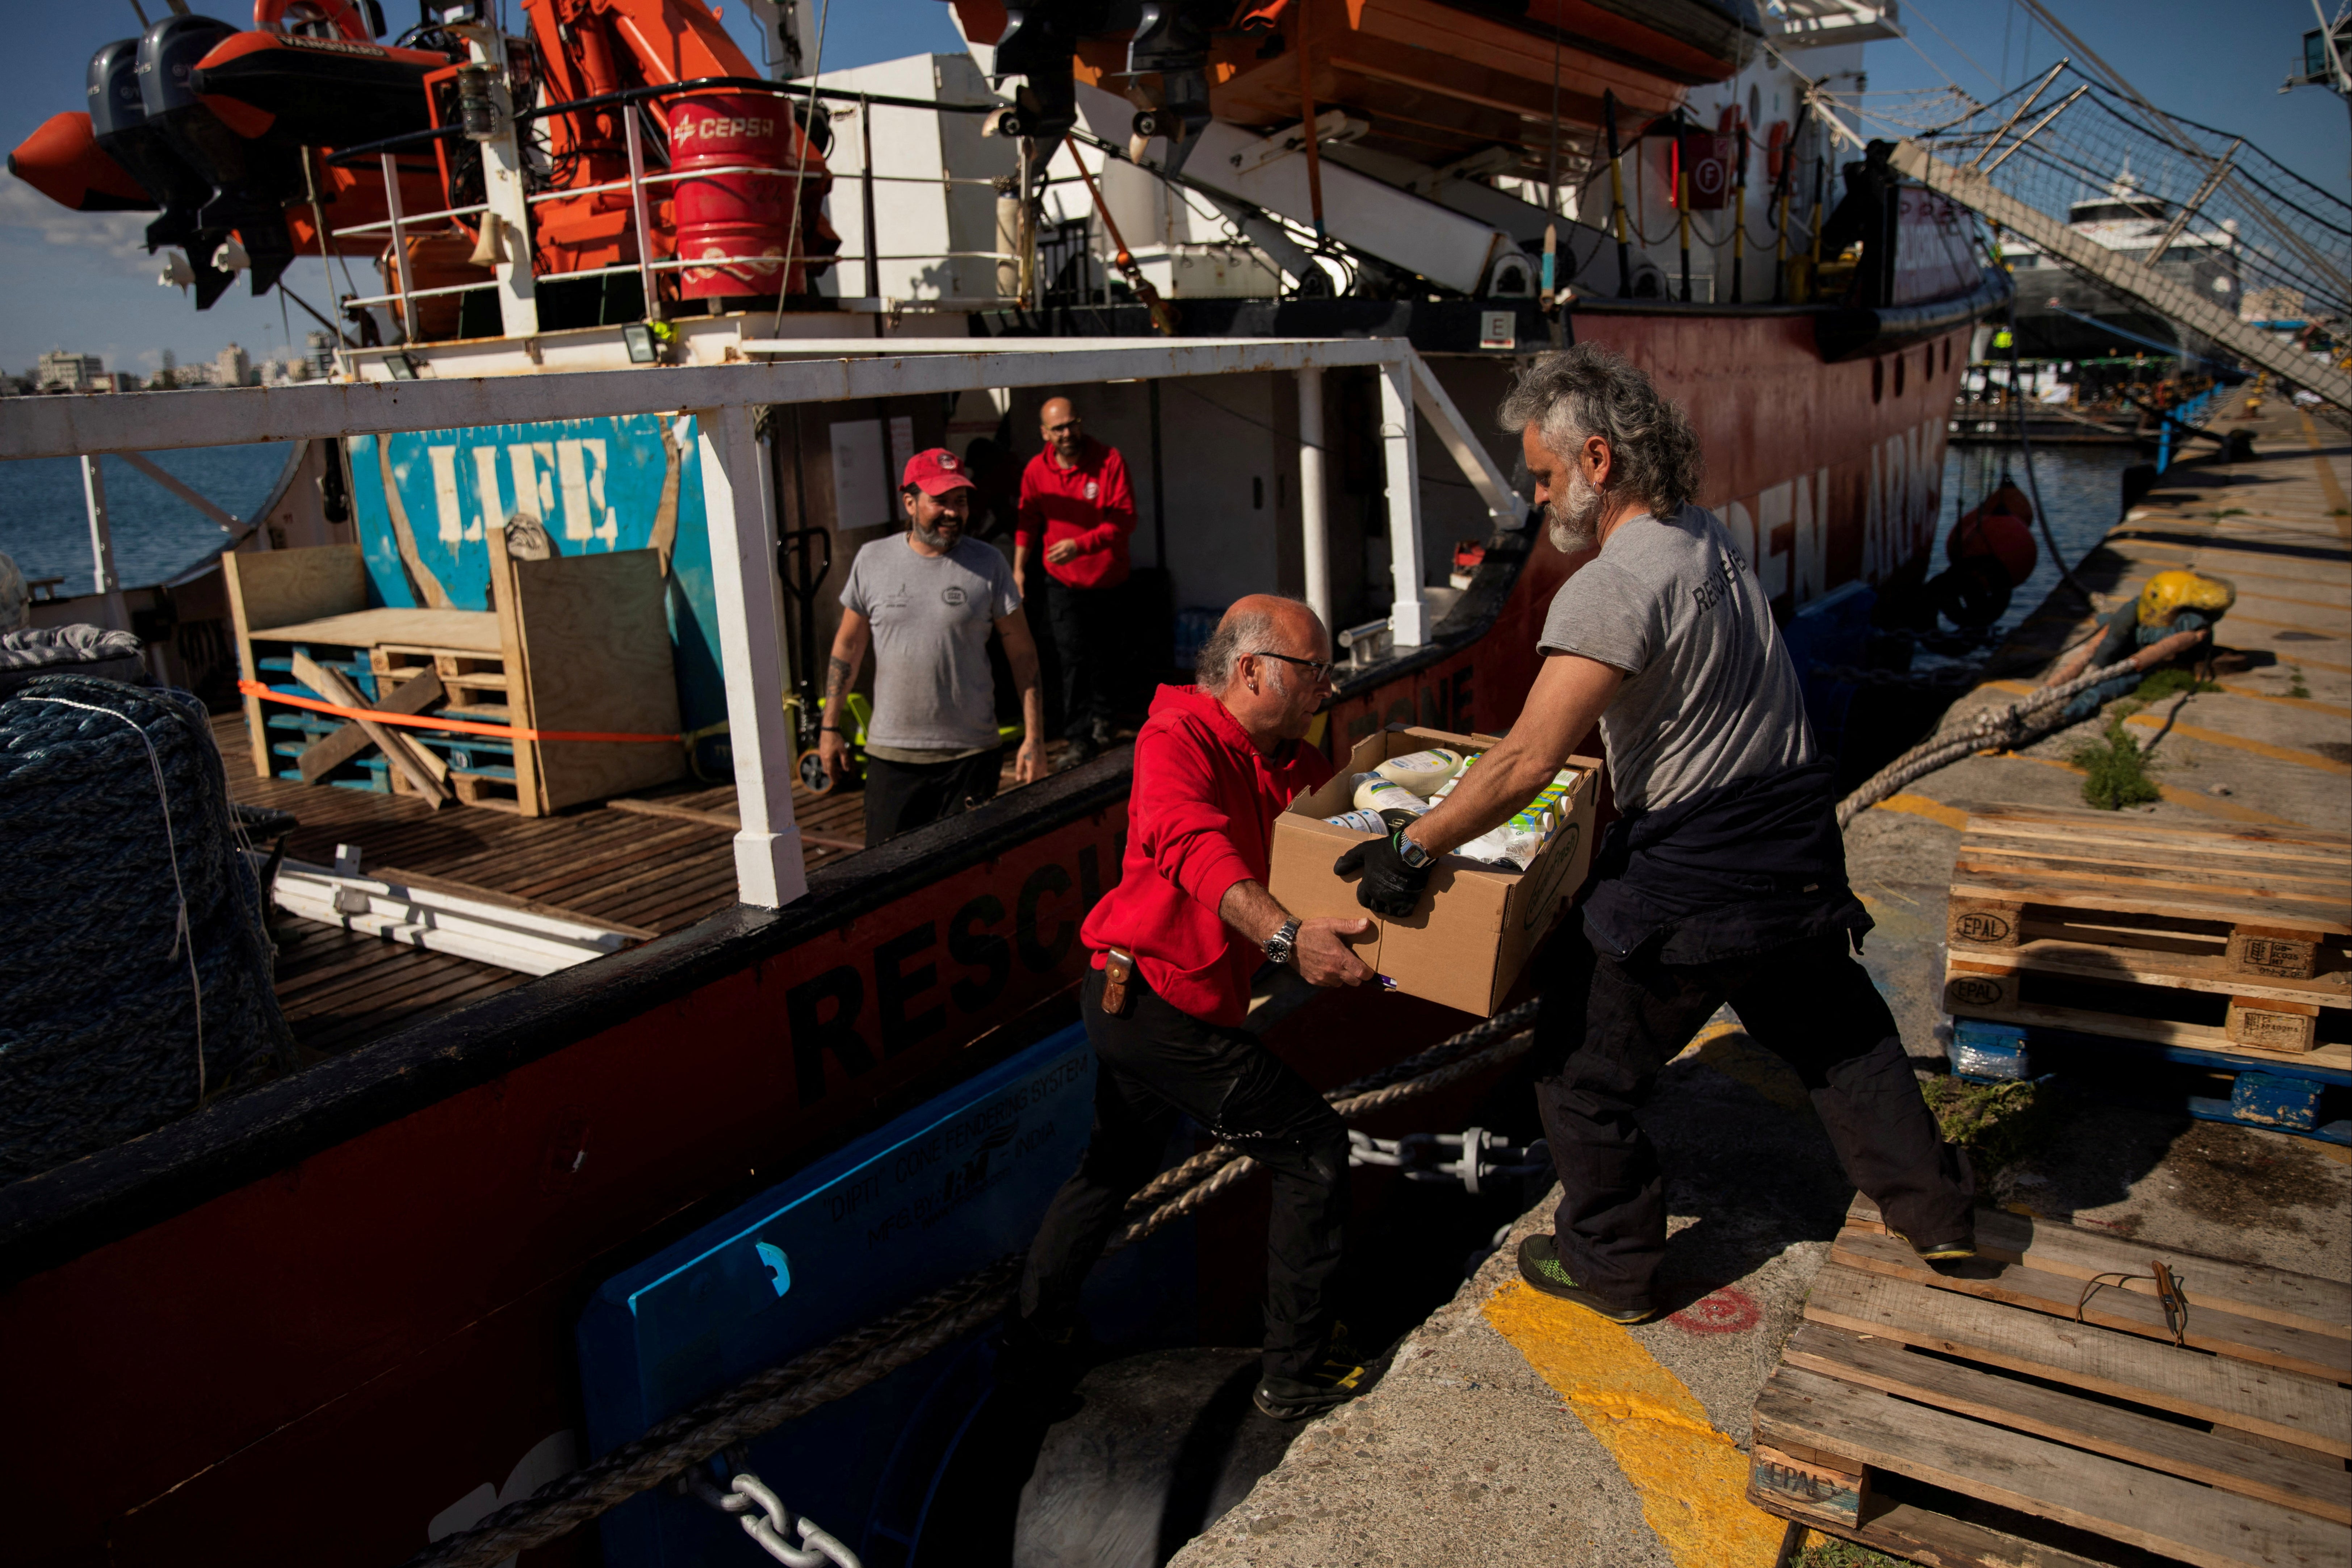 Open Arms members carry humanitarian aid for Gaza in a joint mission between the NGO and World Central Kitchen in the port of Larnaca